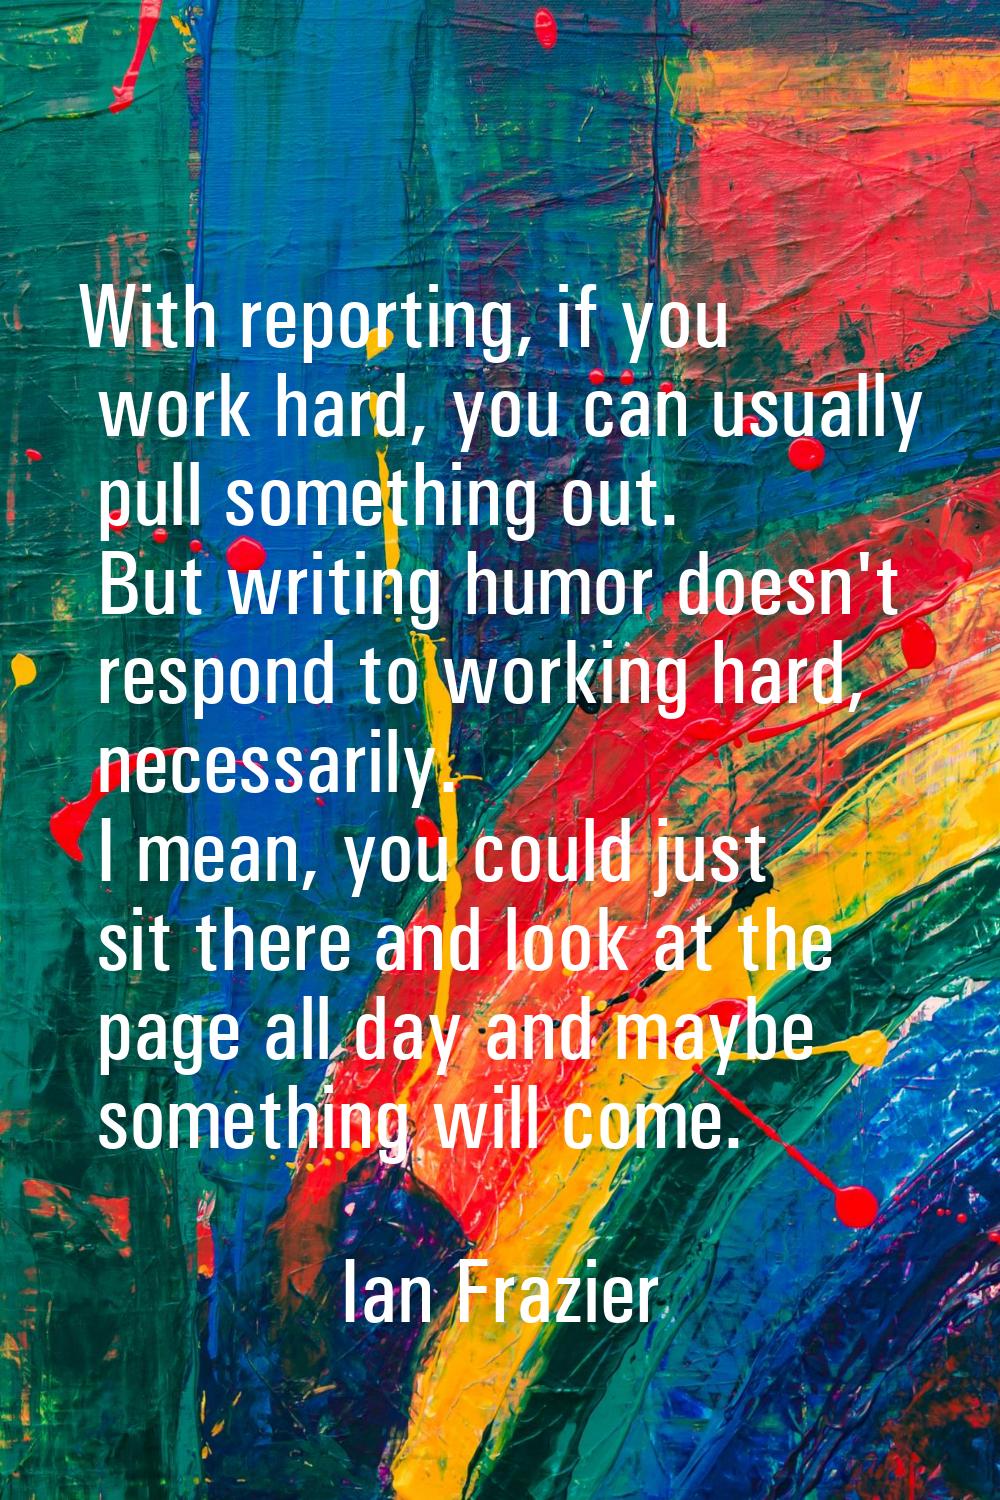 With reporting, if you work hard, you can usually pull something out. But writing humor doesn't res